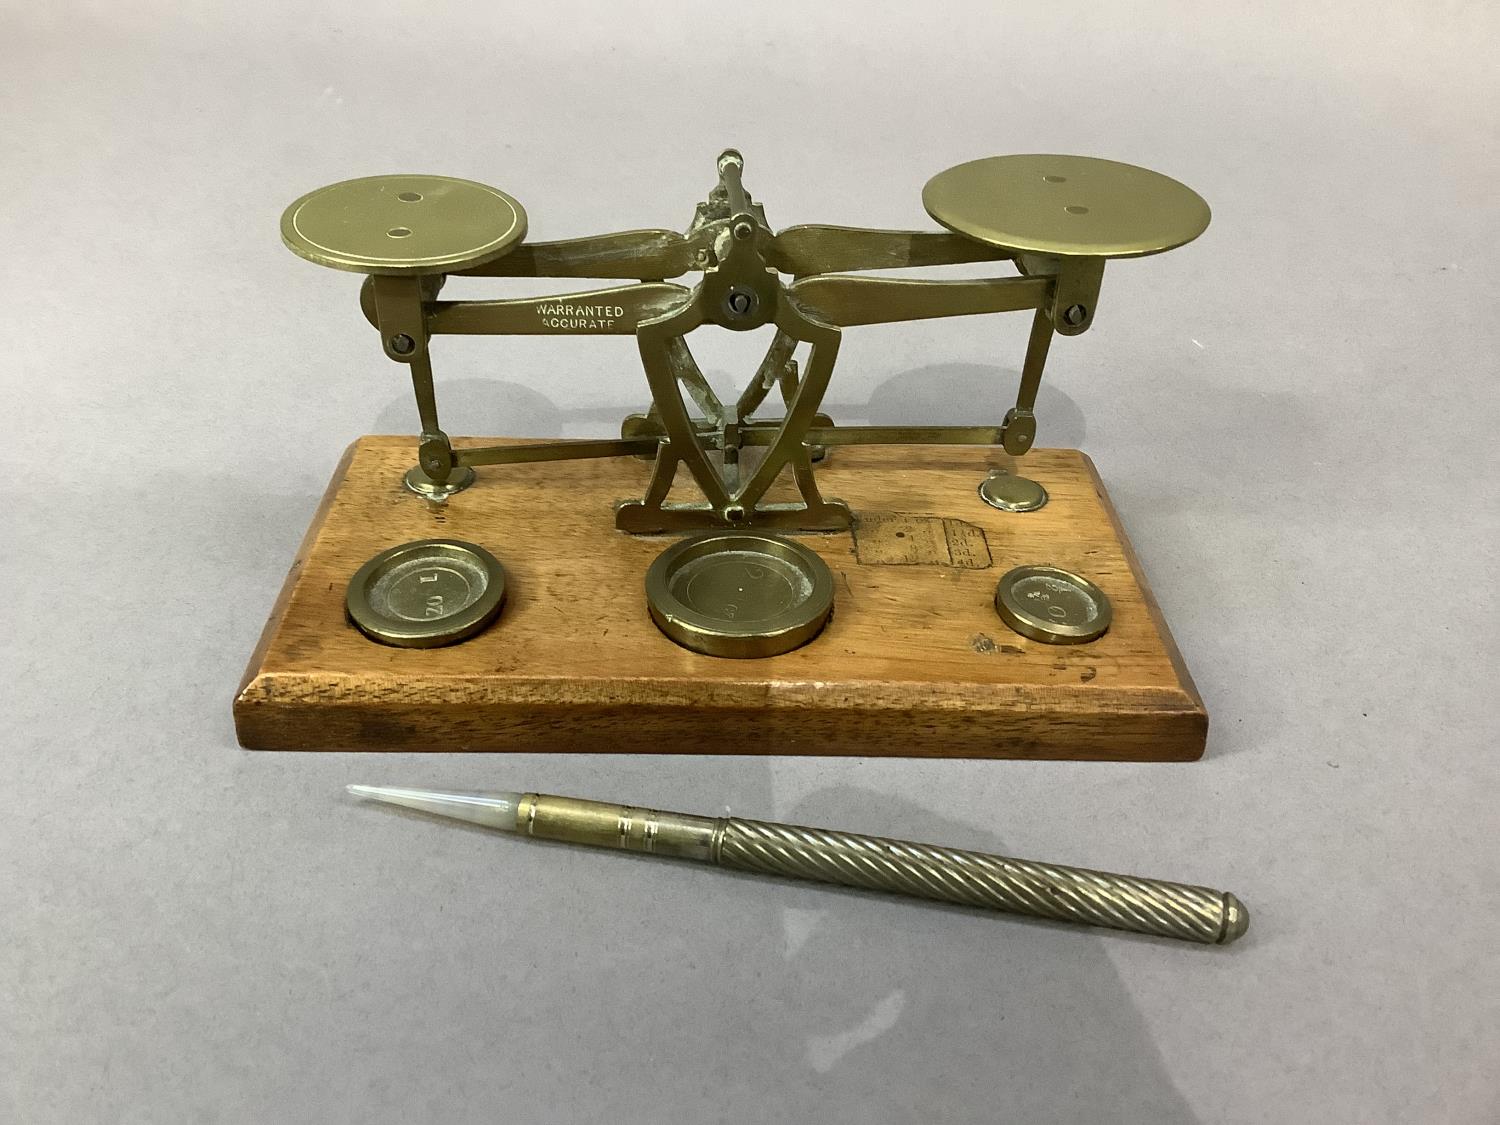 An Edwardian mahogany and brass set of postal scales with weights for 0.5oz, 1oz and 2oz together